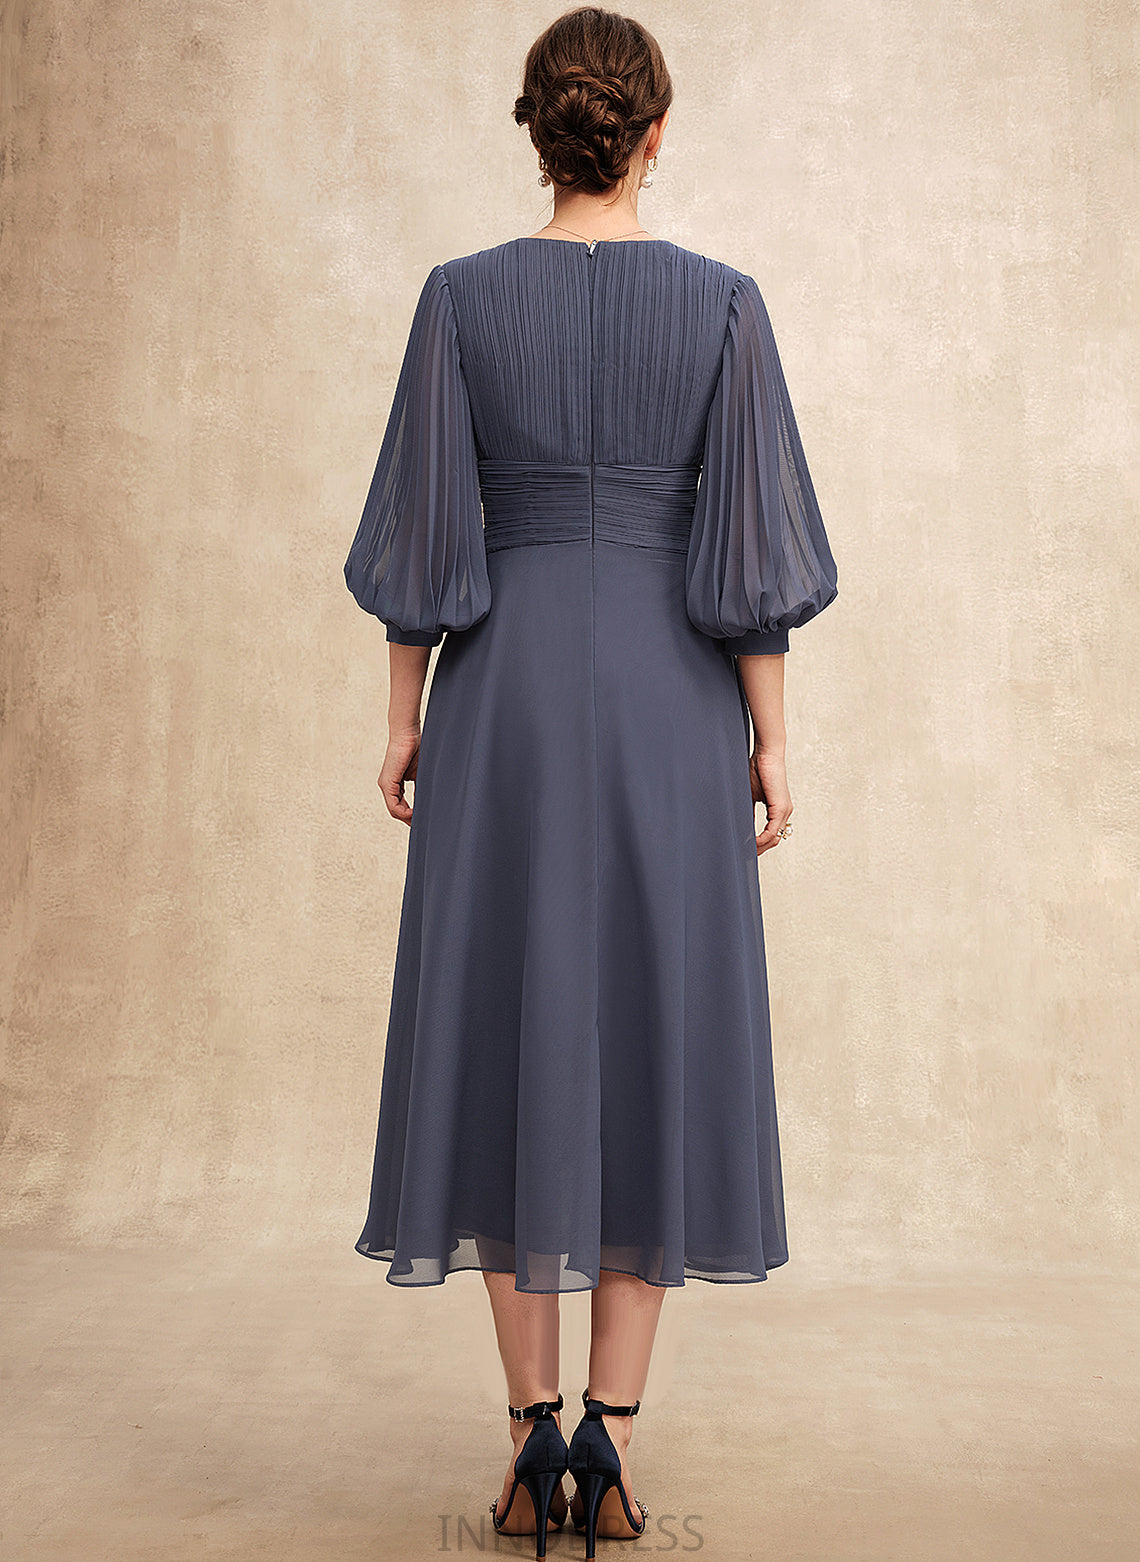 With Addison Mother of the Bride Dresses of Ruffle Mother V-neck A-Line Bride the Tea-Length Dress Chiffon